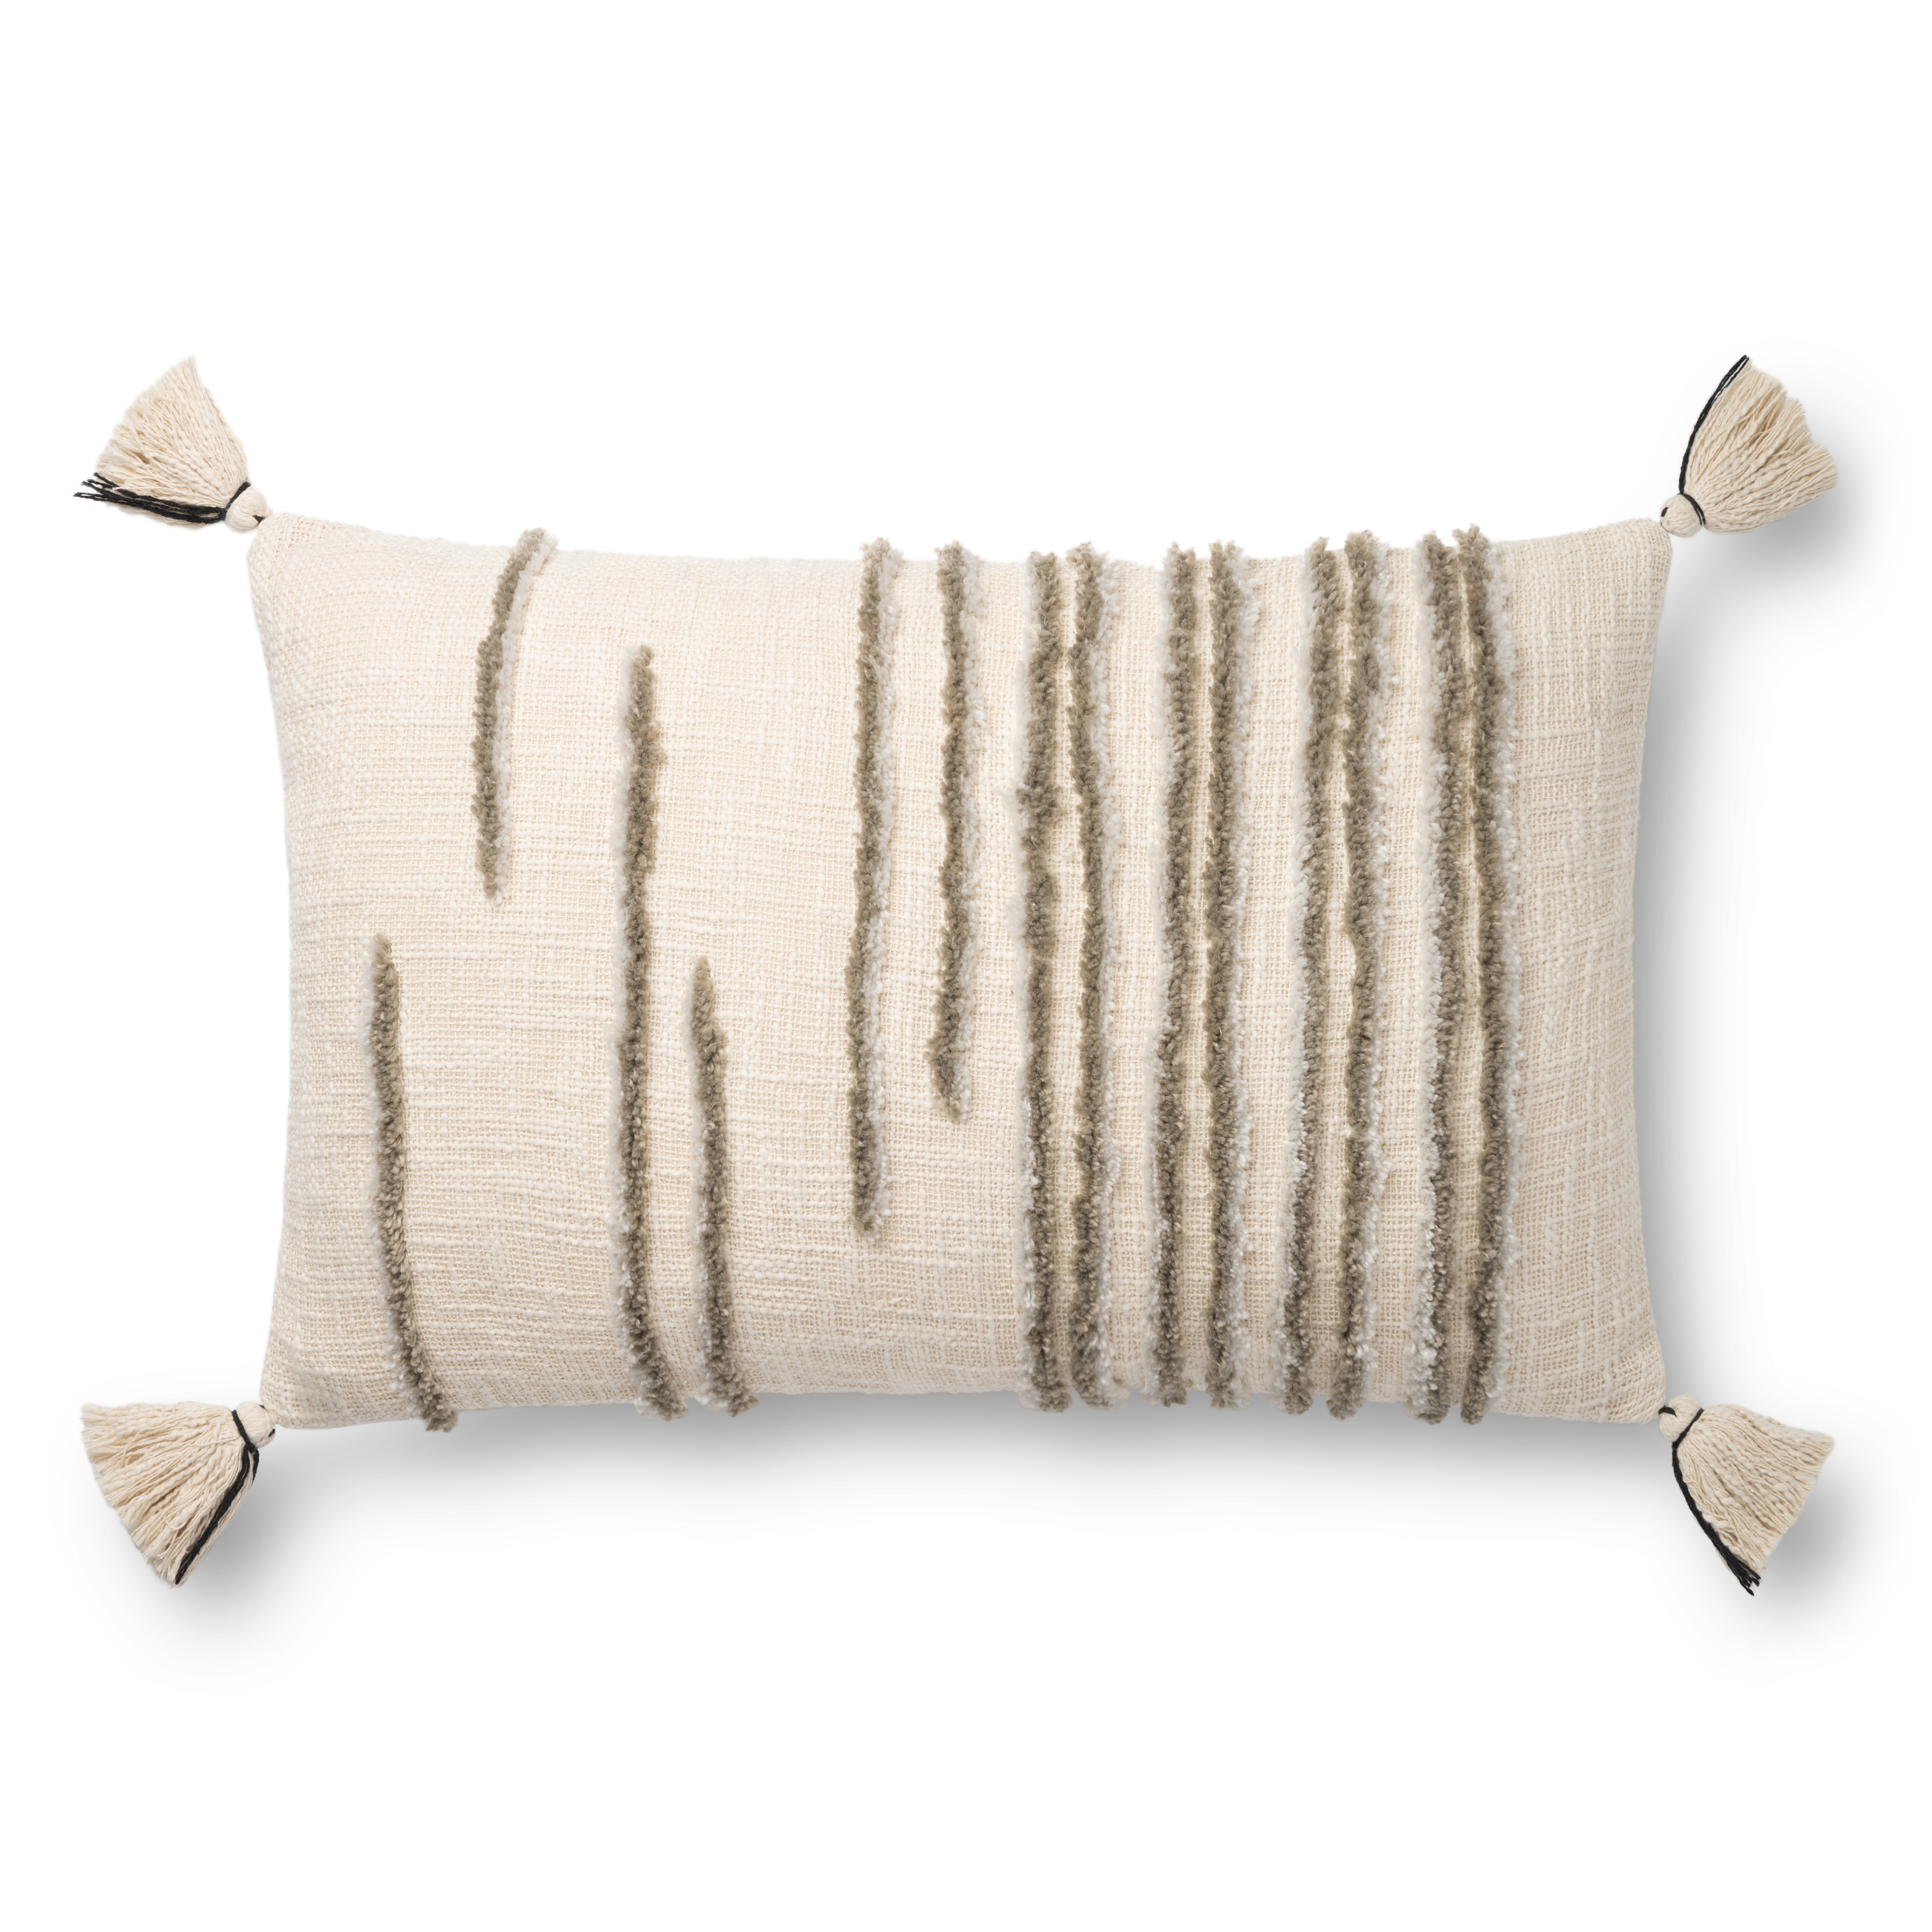 Loloi Pillows P0832 Natural / Stone 22" x 22" Cover Only - Image 0